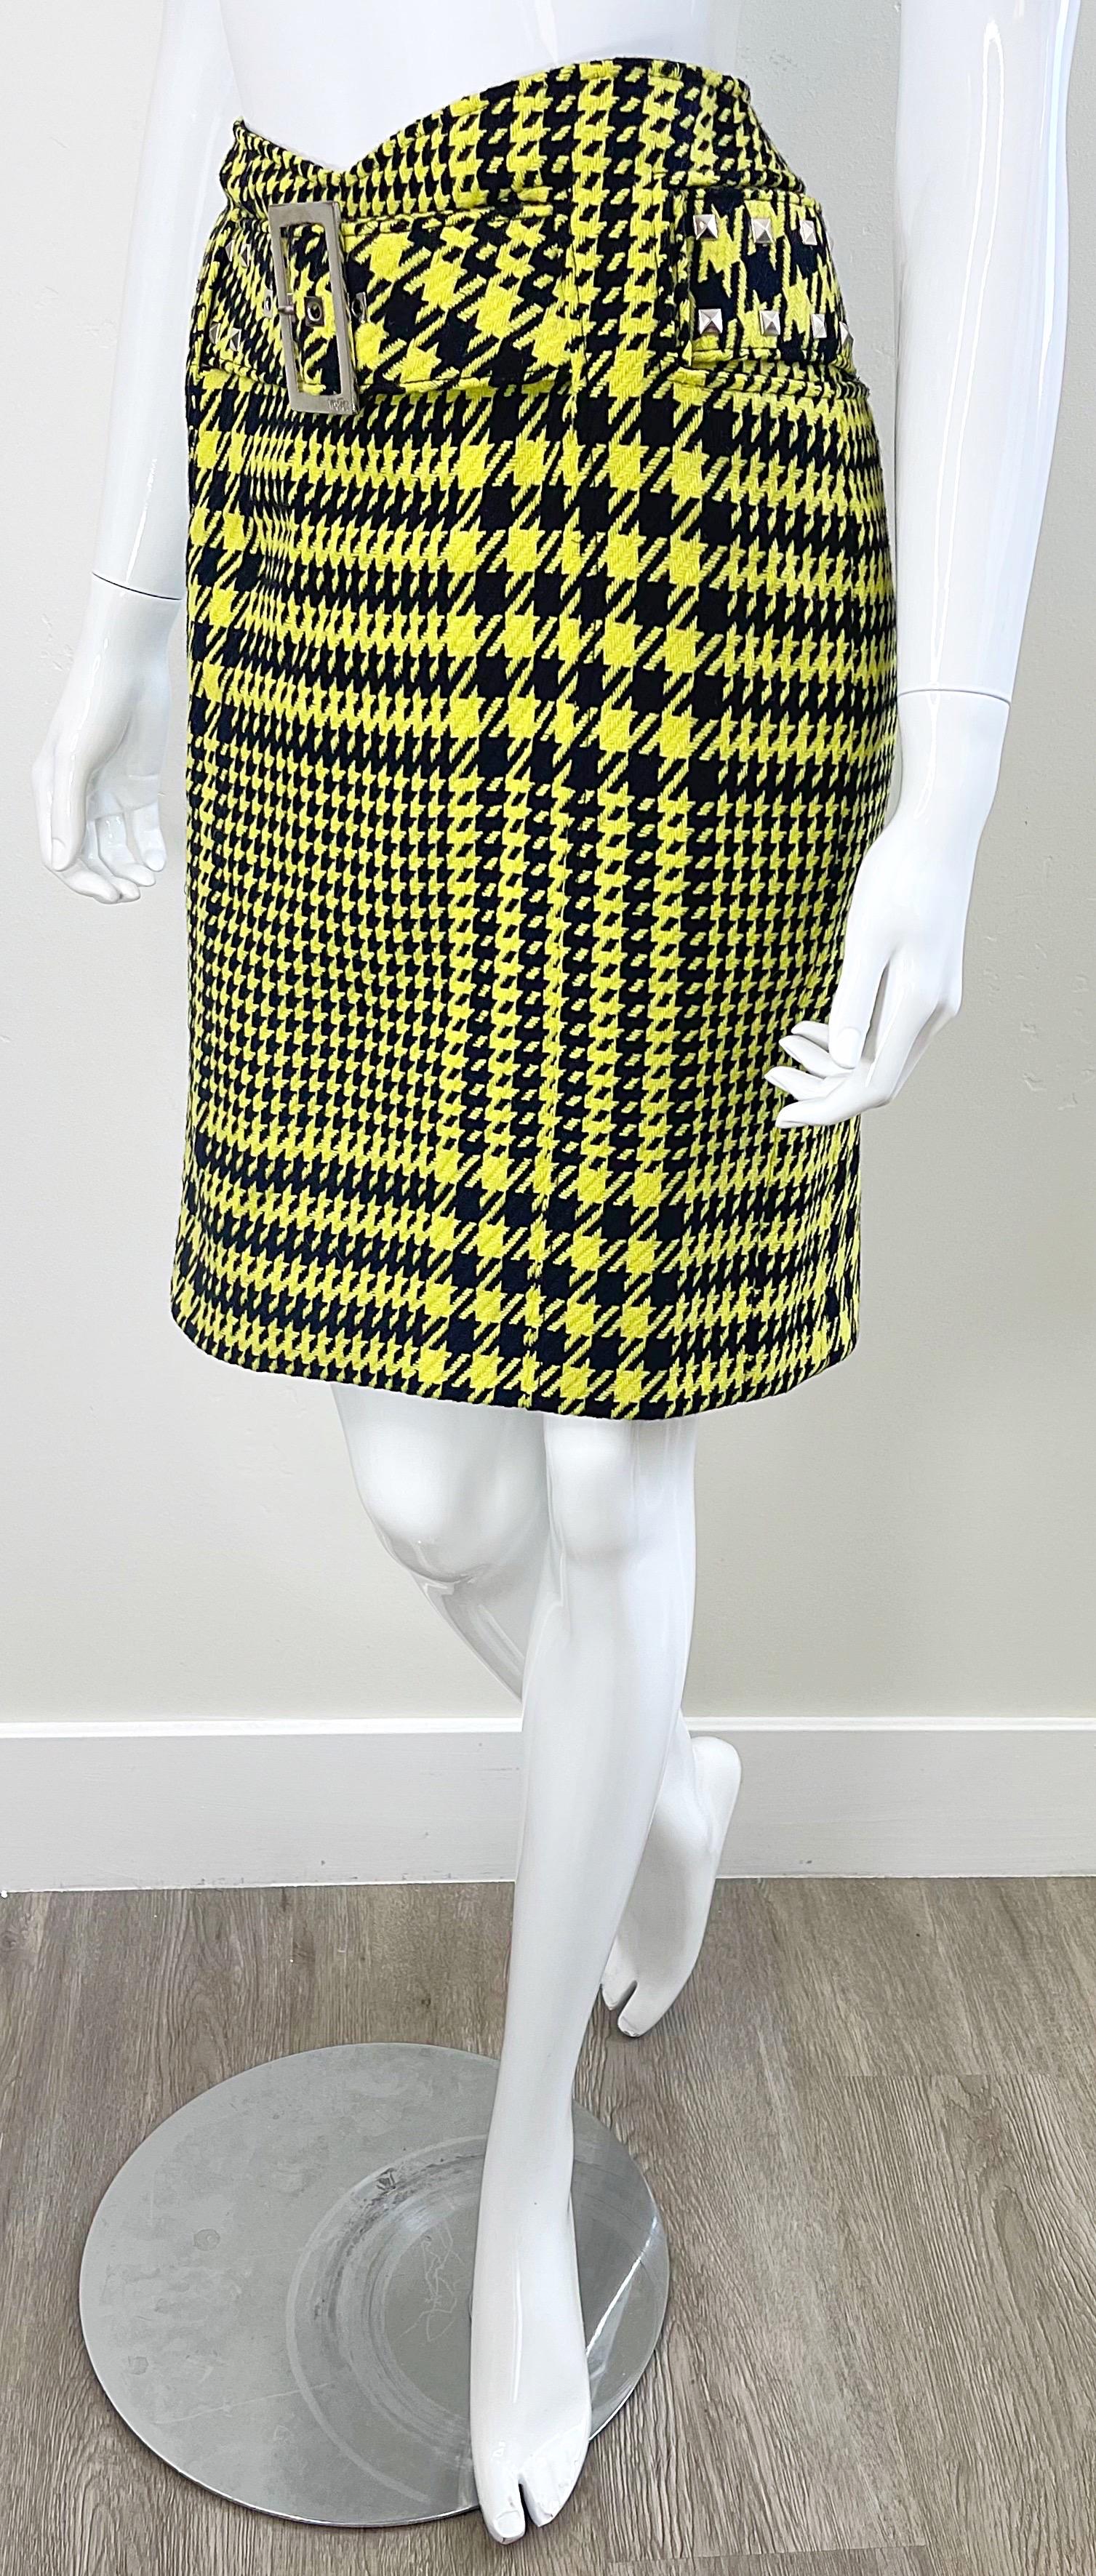 Gianni Versace Fall 2004 Runway Size 8 Yellow Black Houndstooth Belted Skirt For Sale 2